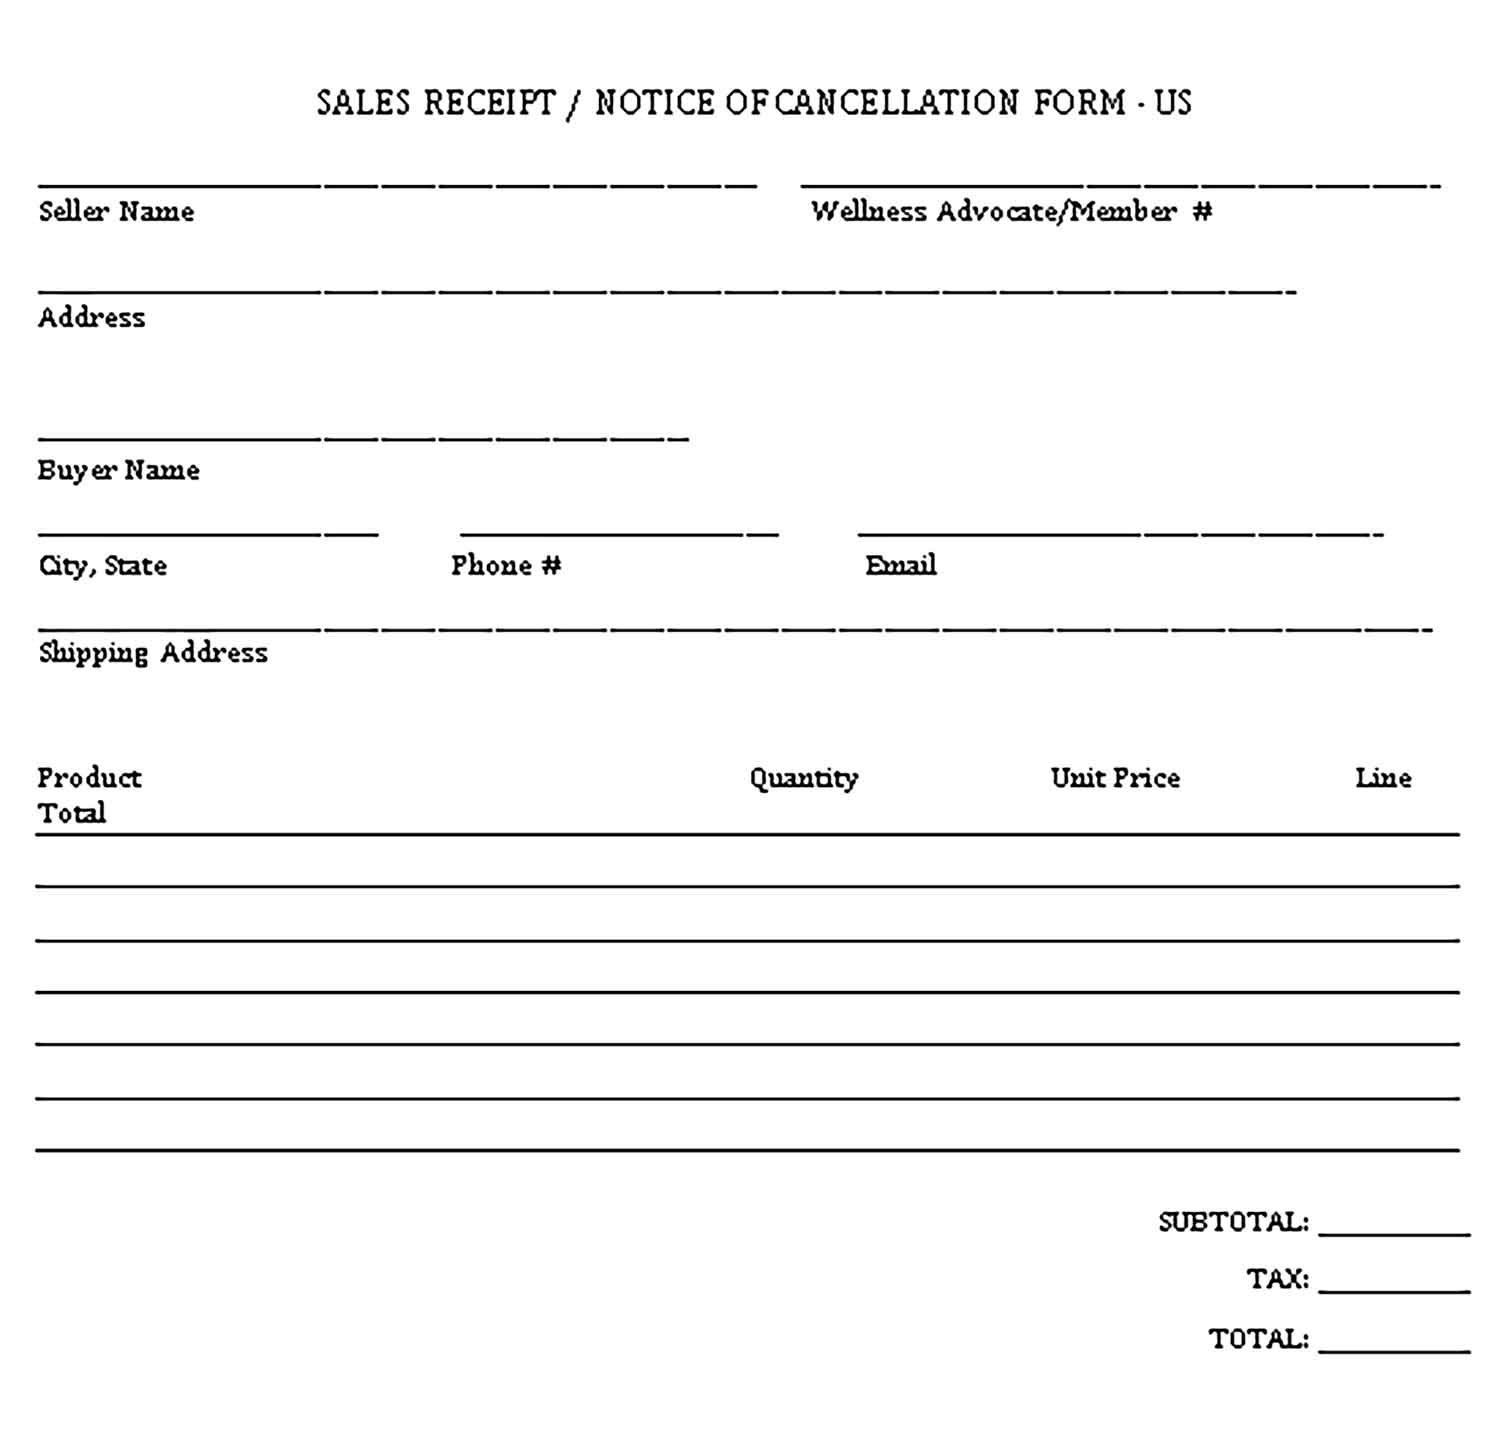 Sample Sale Receipt Notice of Cancellation Form Templates